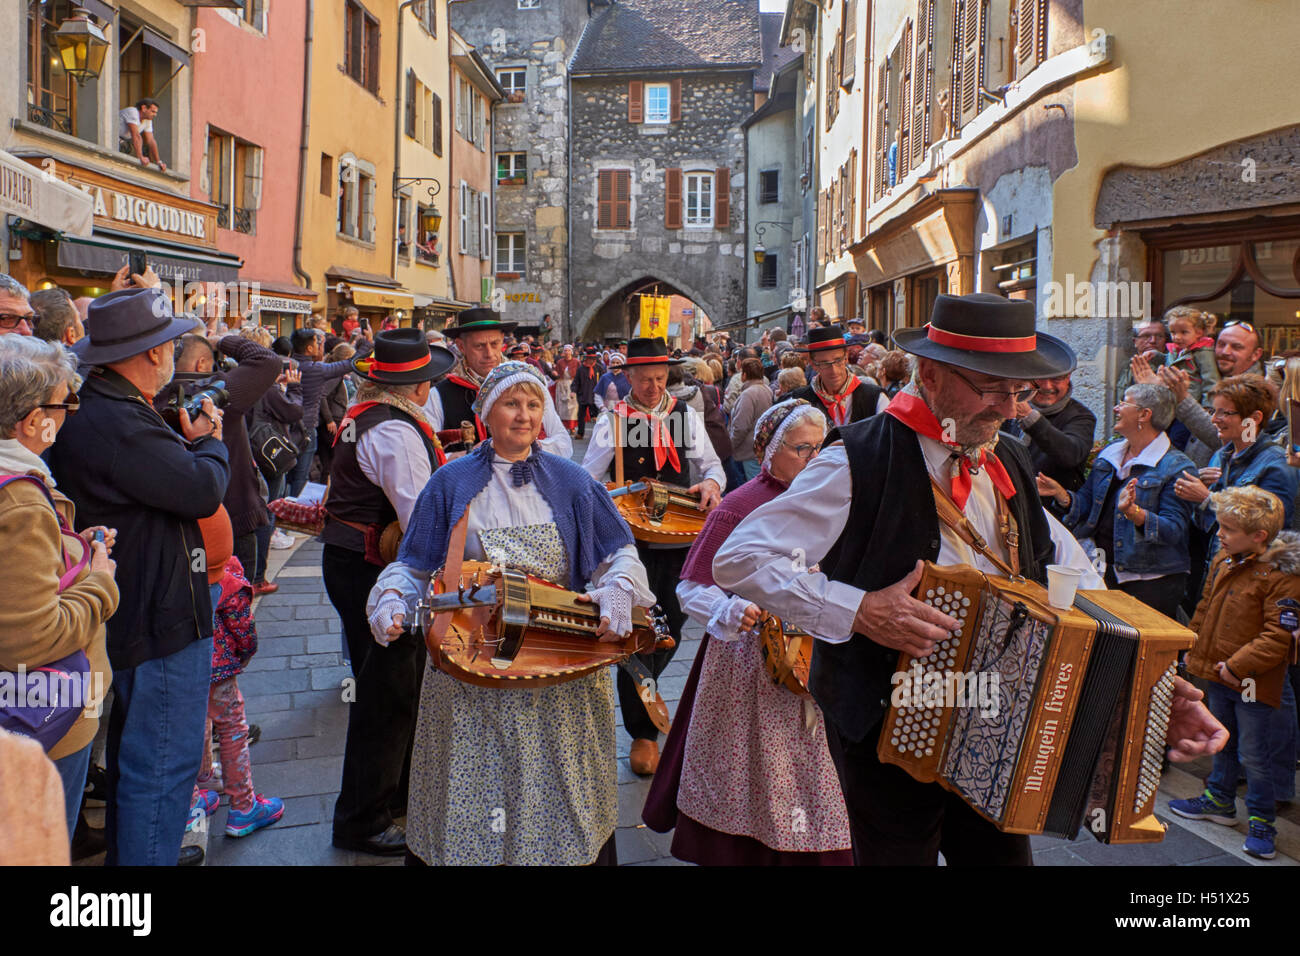 Musicians in traditional dress during the Retour des Alpages festival. Annecy, Haute-Savoie, France. Stock Photo